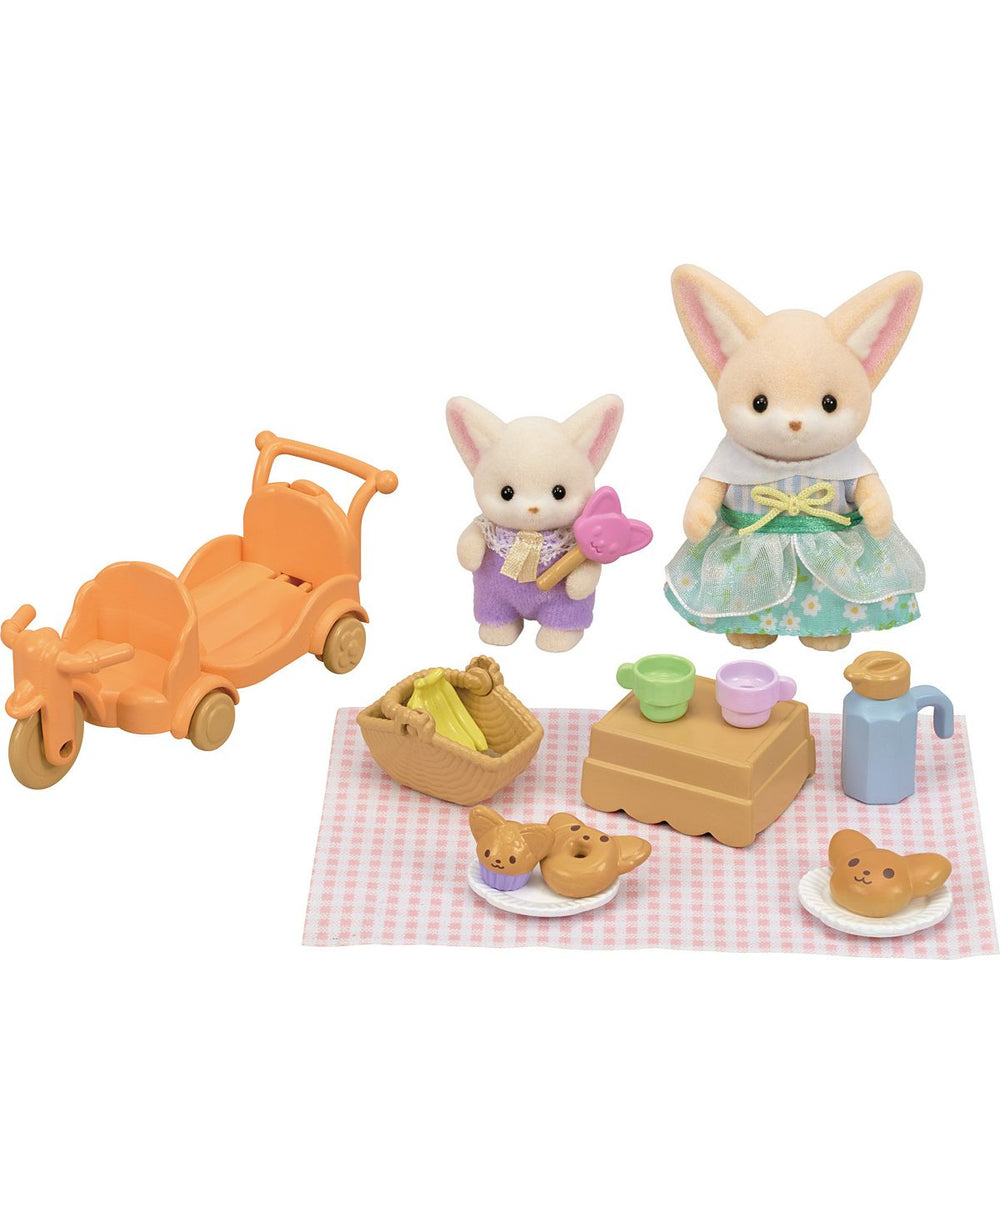 Calico Critters Sunny Picnic Set with Fennec Fox Figures and Accessories